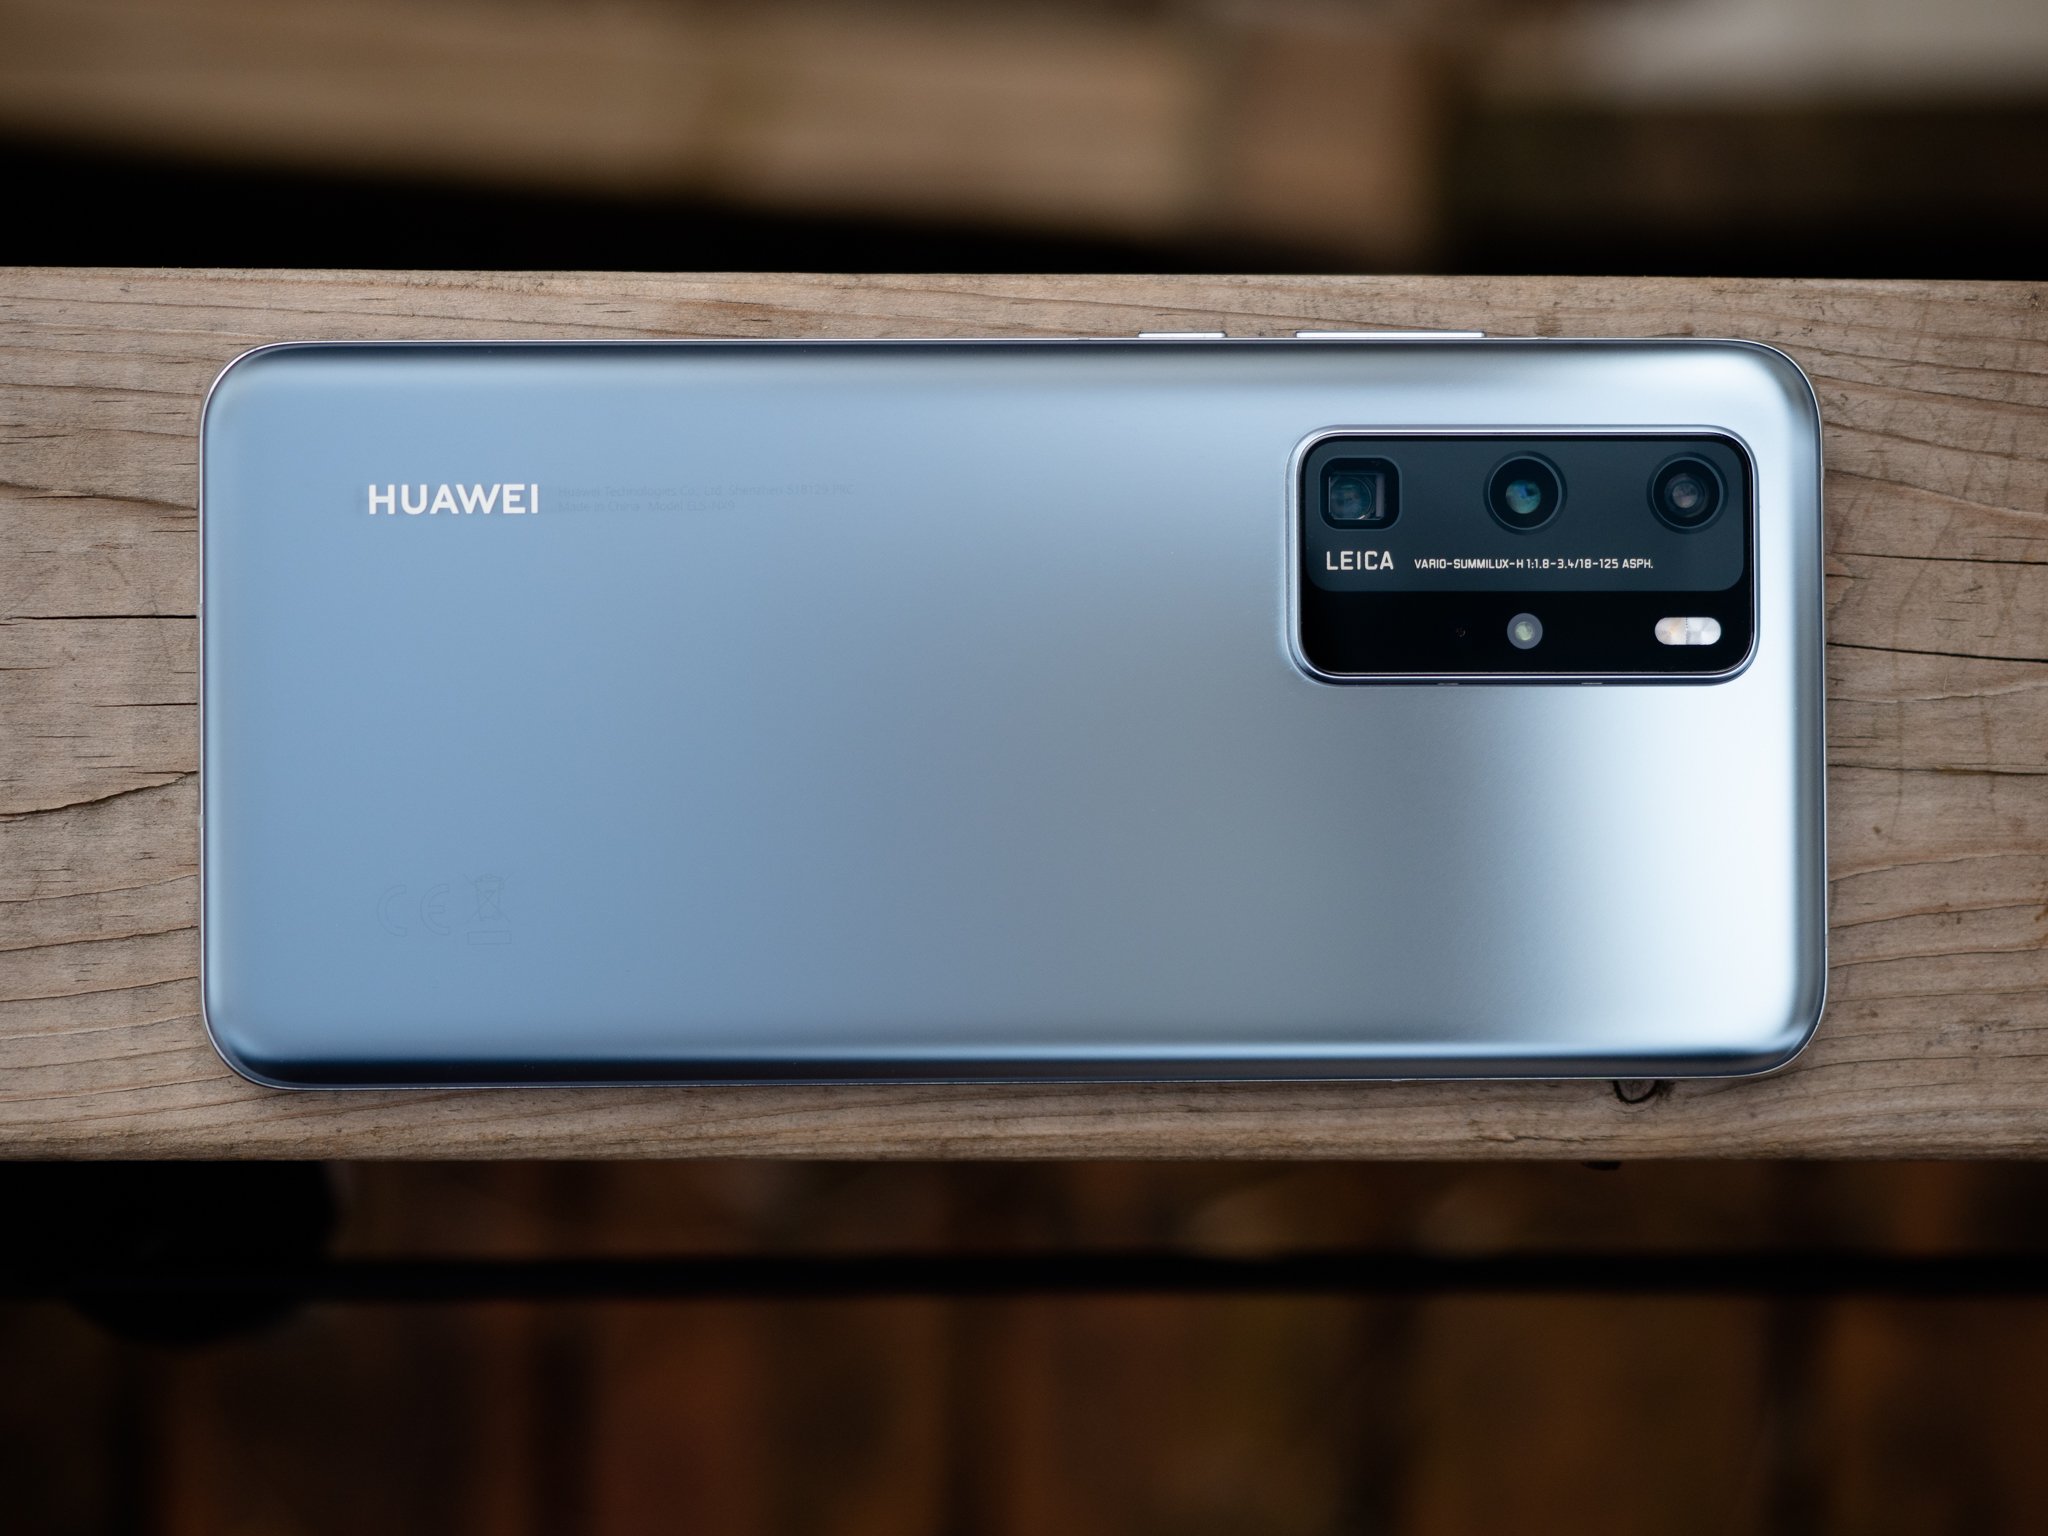 Huawei P40 Pro hands-on review: Camera slaps, but lacks most apps ...